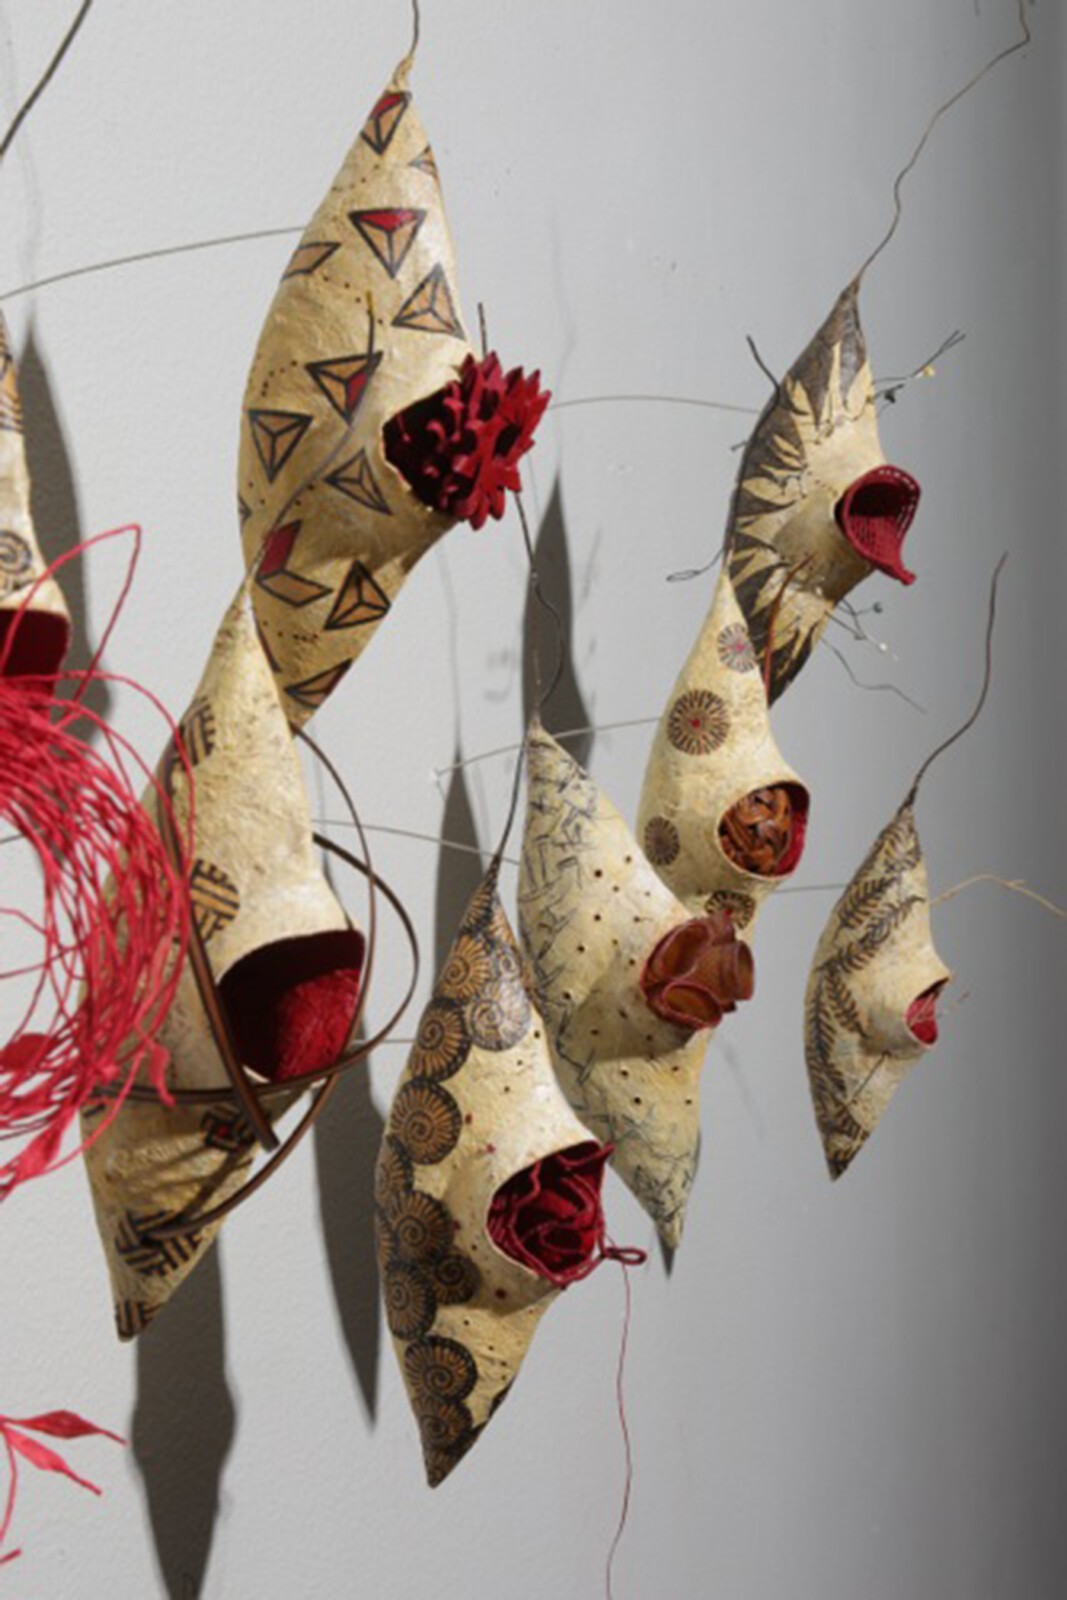 Danielle Bodine, Moonlight Flight (detail), Mulberry and recycled papers, natural and found objects, waxed linen